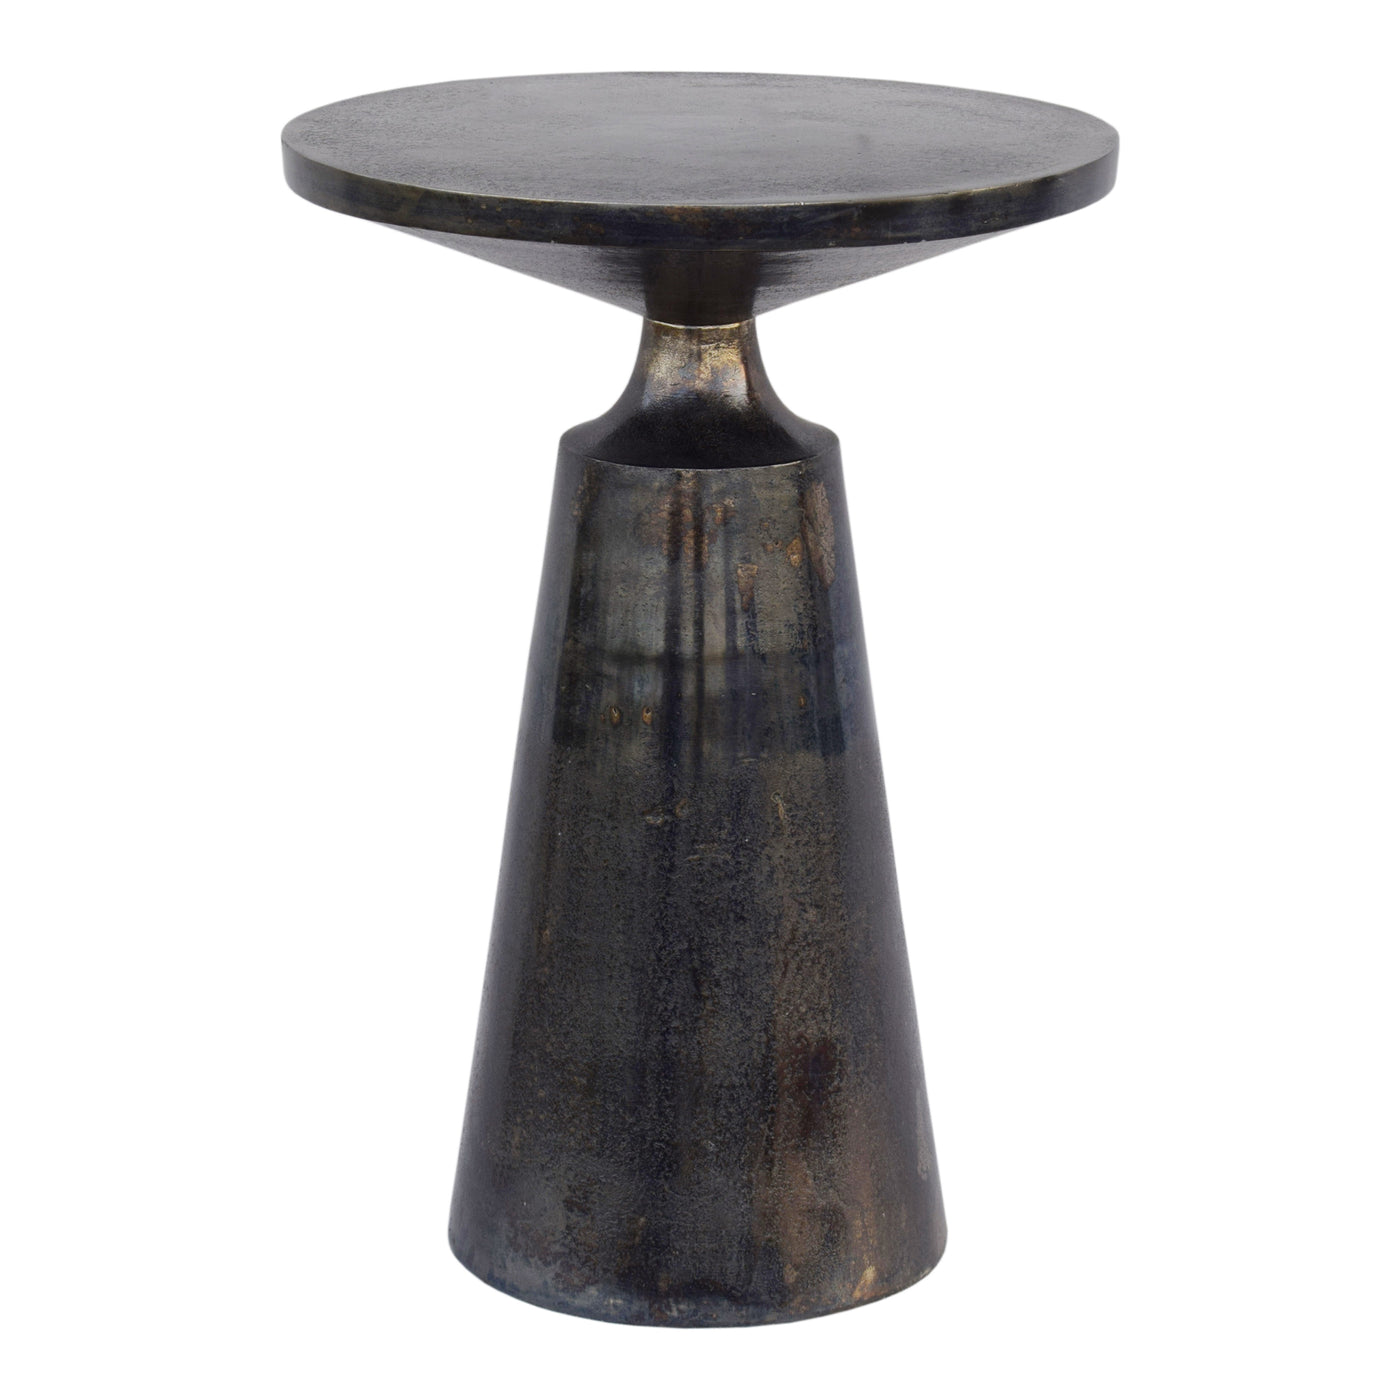 This sturdy metal accent table has a charcoal-grey finish for a cool, industrial-modern touch.
<h6>Dimensions</h6>
H= 22
W...